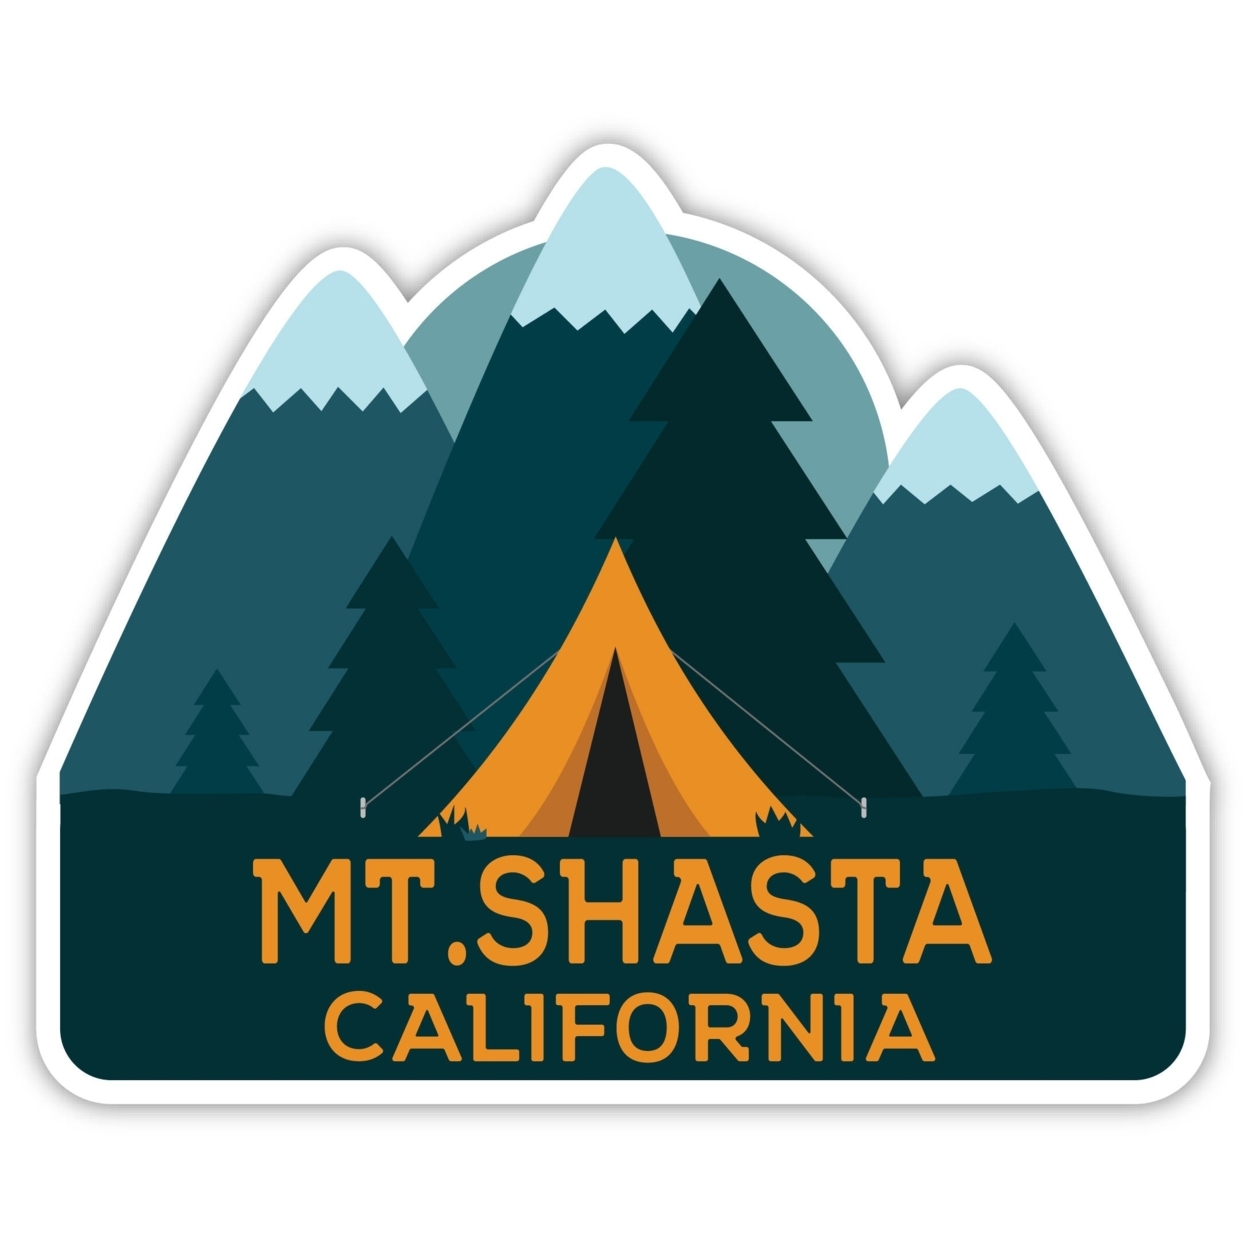 Mt.Shasta California Souvenir Decorative Stickers (Choose Theme And Size) - Single Unit, 2-Inch, Great Outdoors